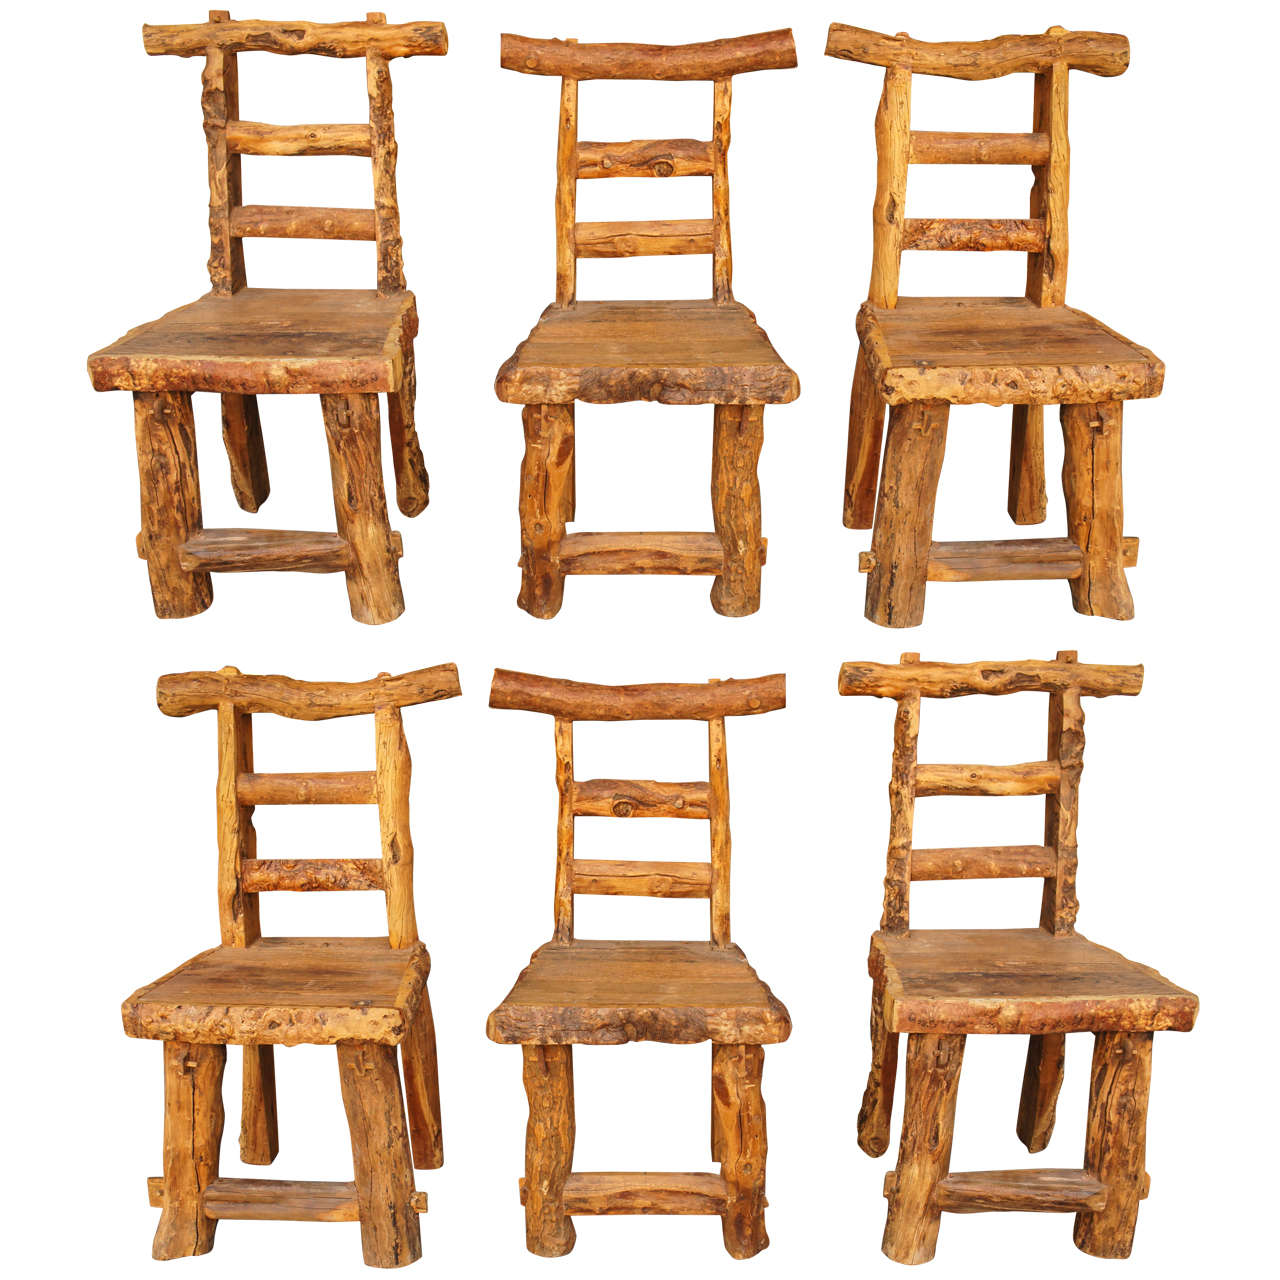 A Set of Large Scale Rustic Chairs